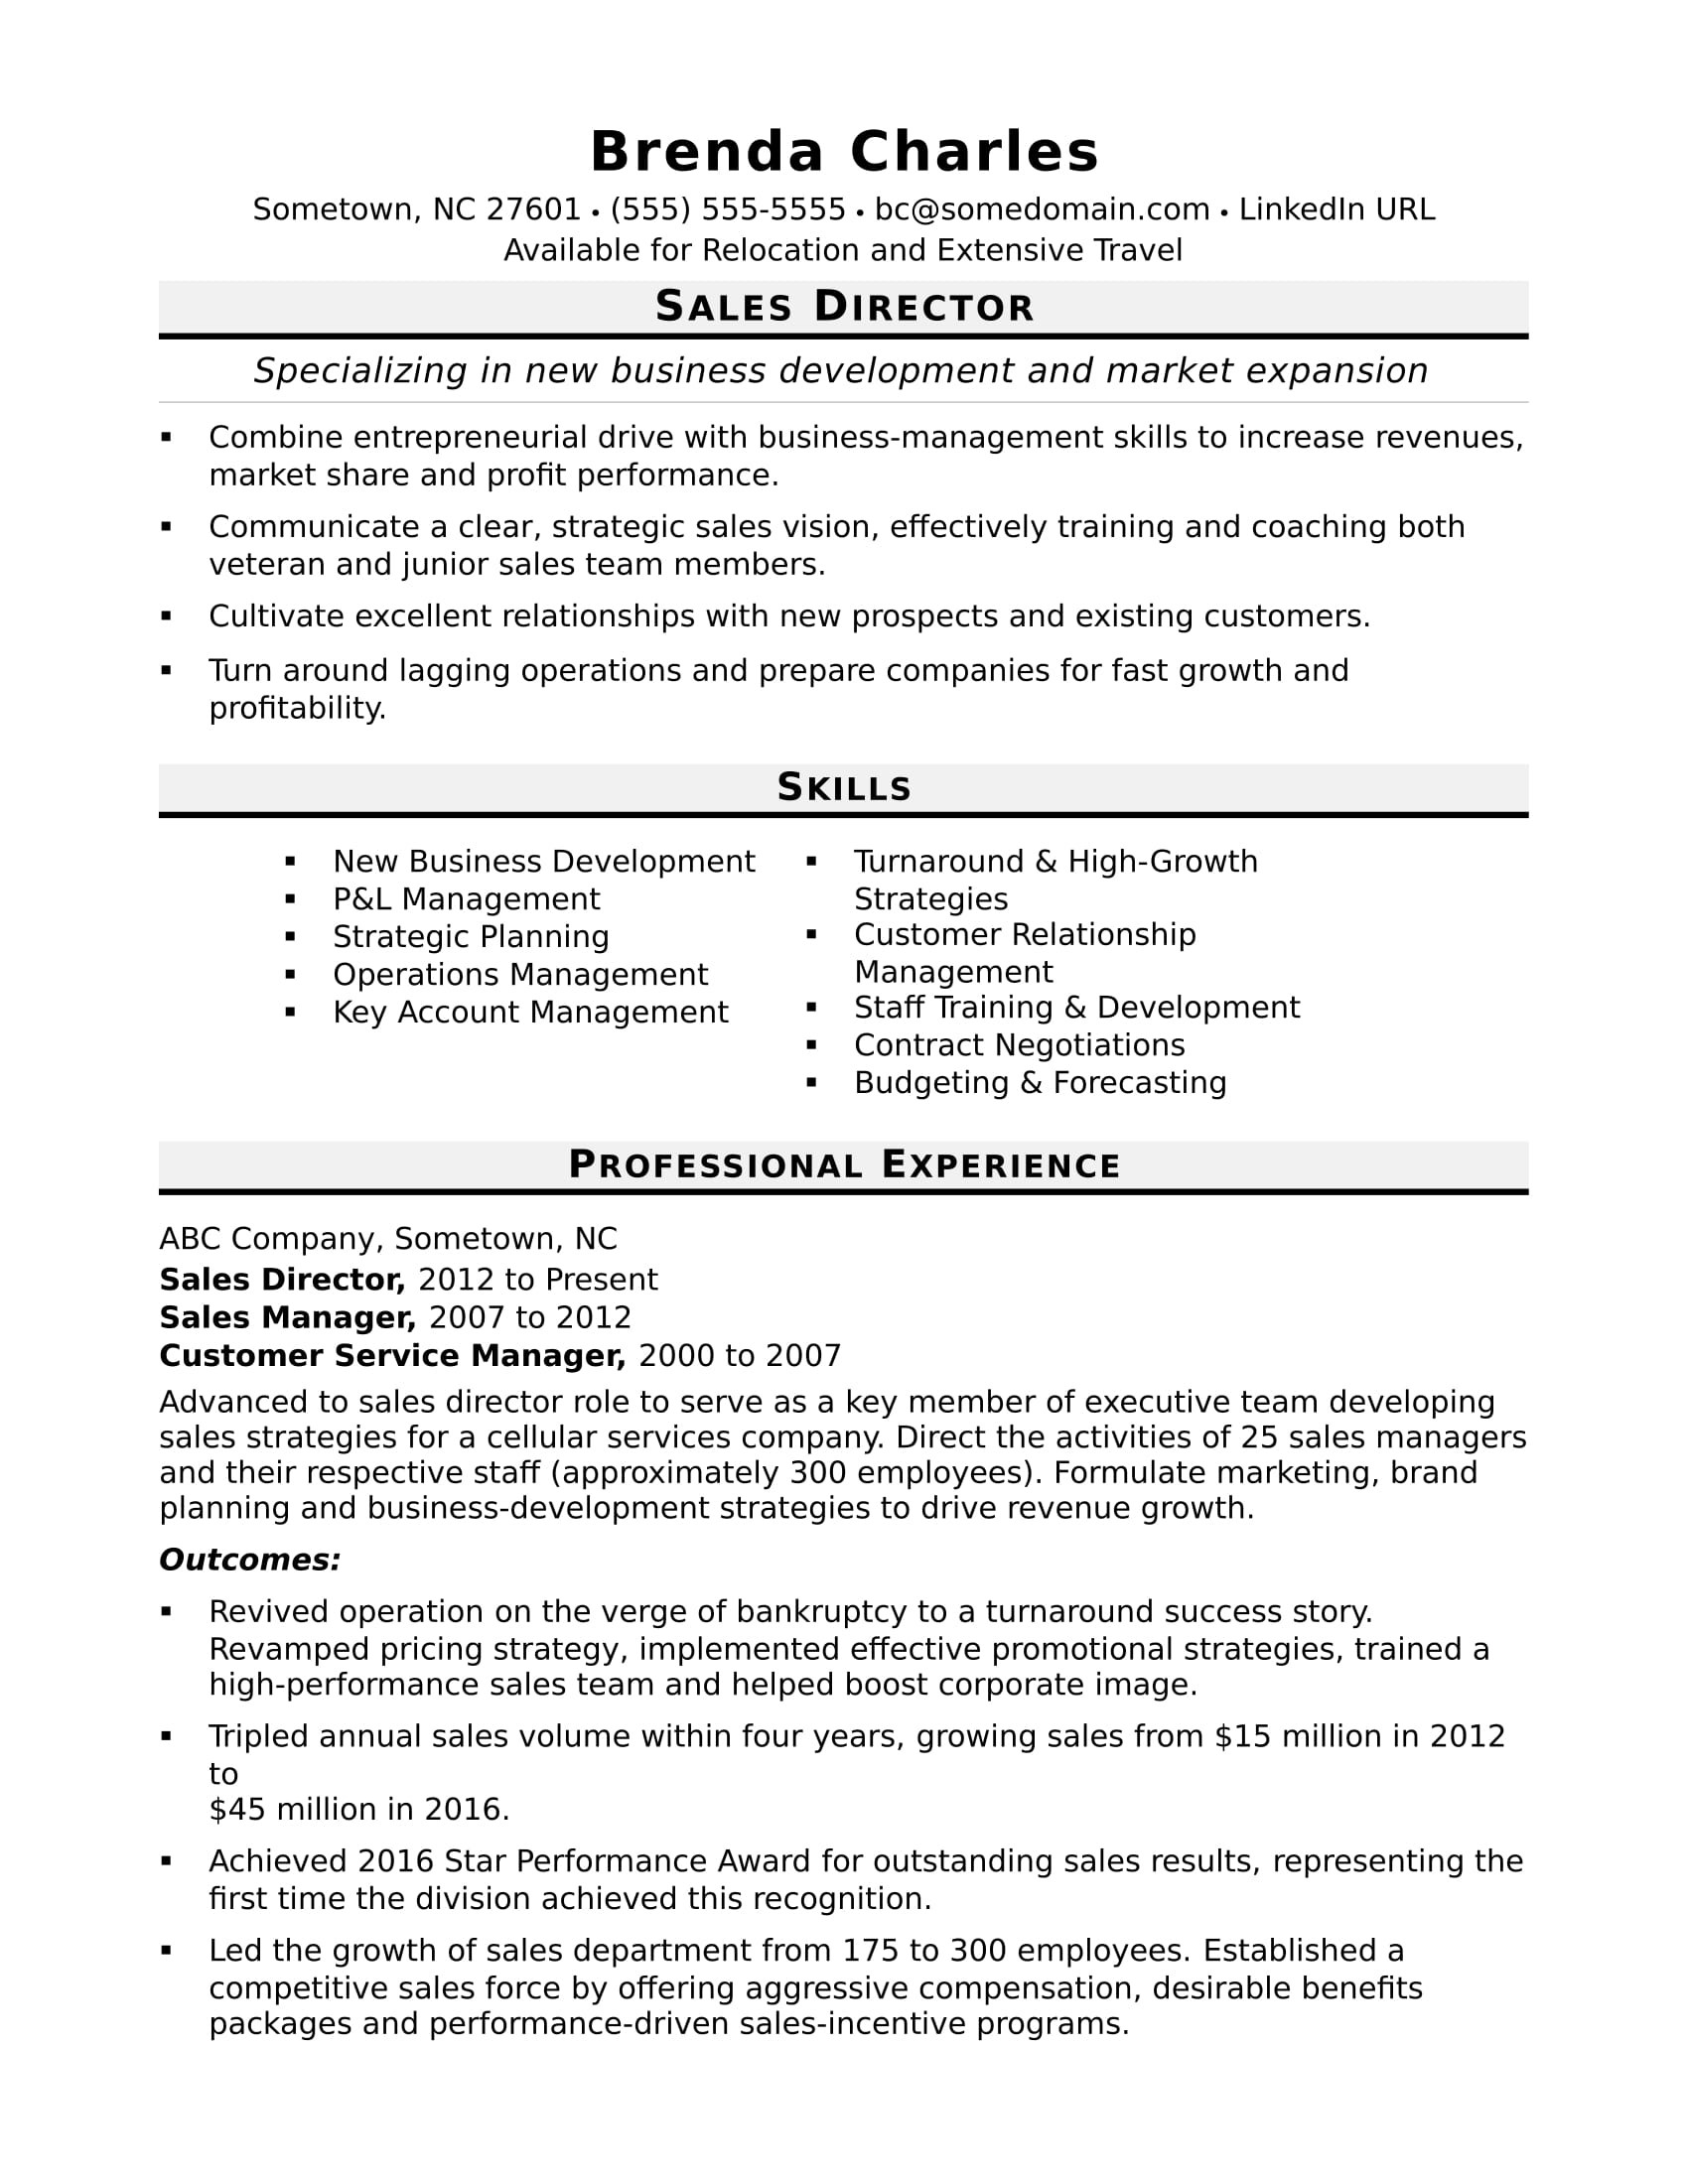 Director Of Sales and Marketing Resume Sample Sales Director Resume Sample Monster.com